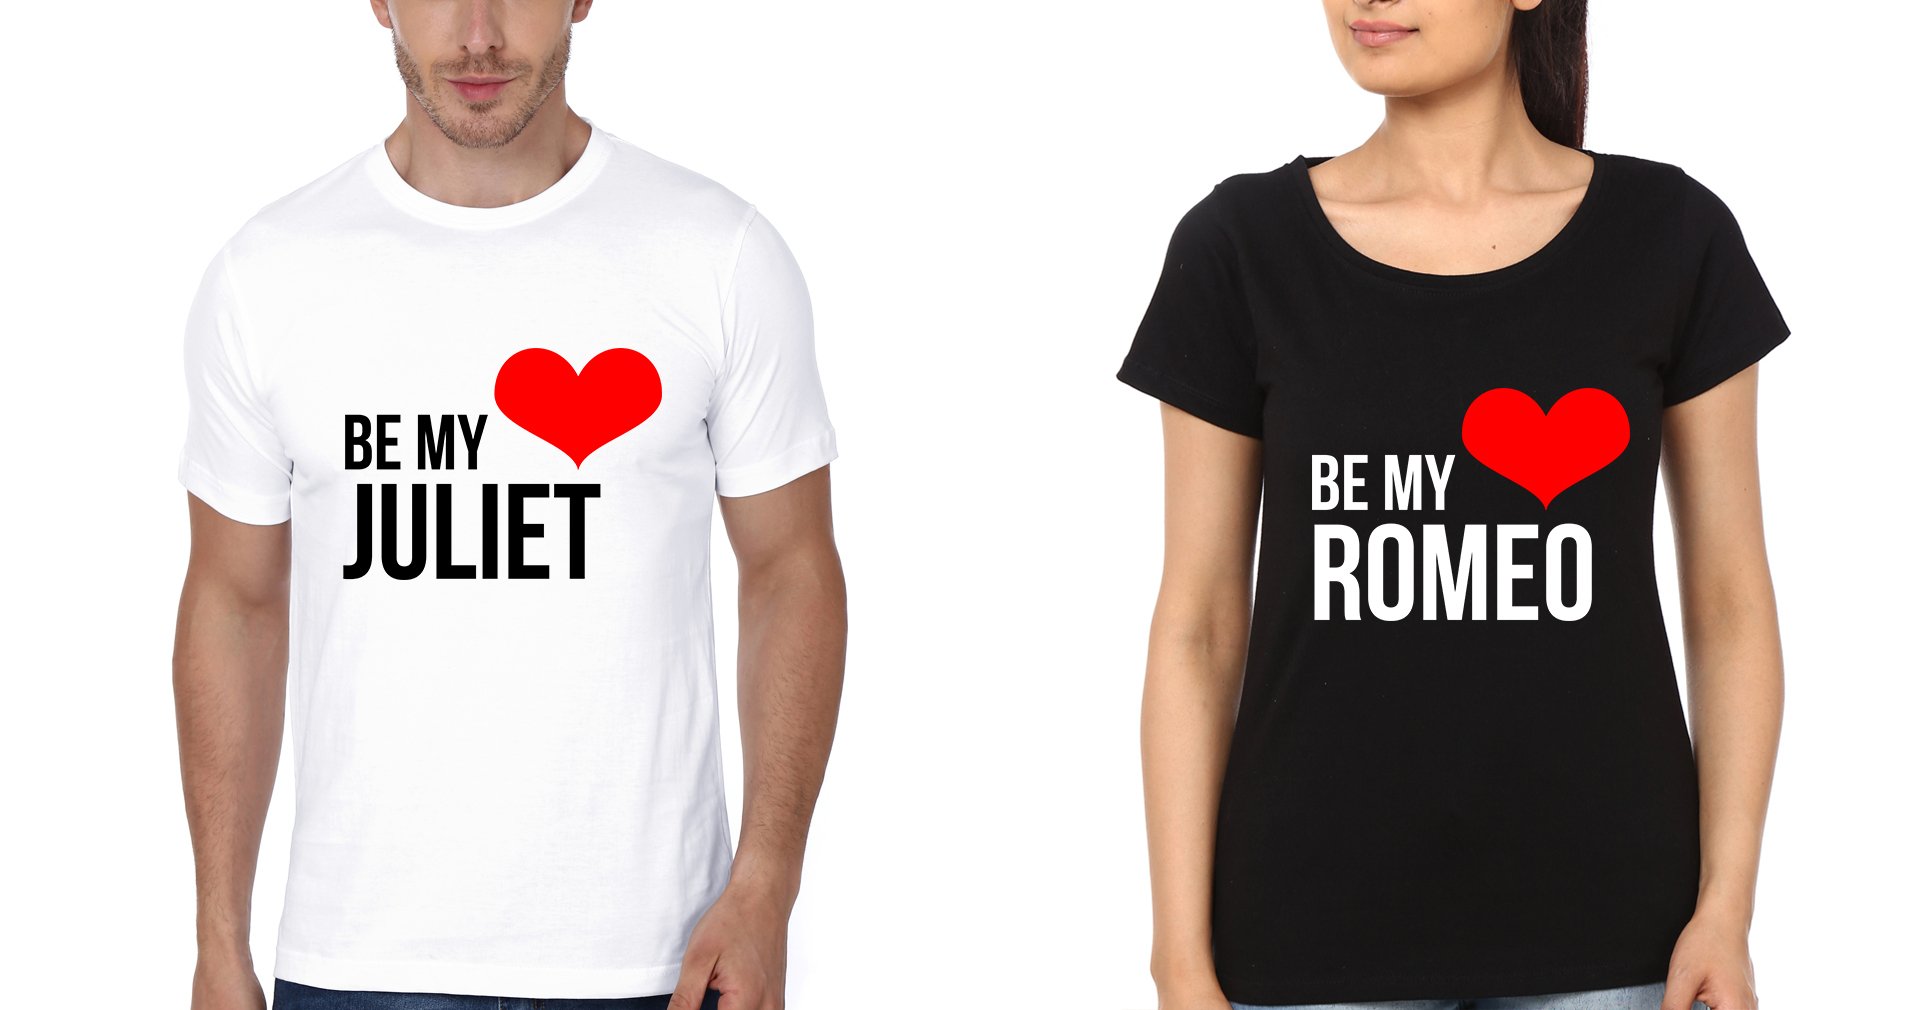 Romeo Juliet Couple Half Sleeves T-Shirts -FunkyTradition